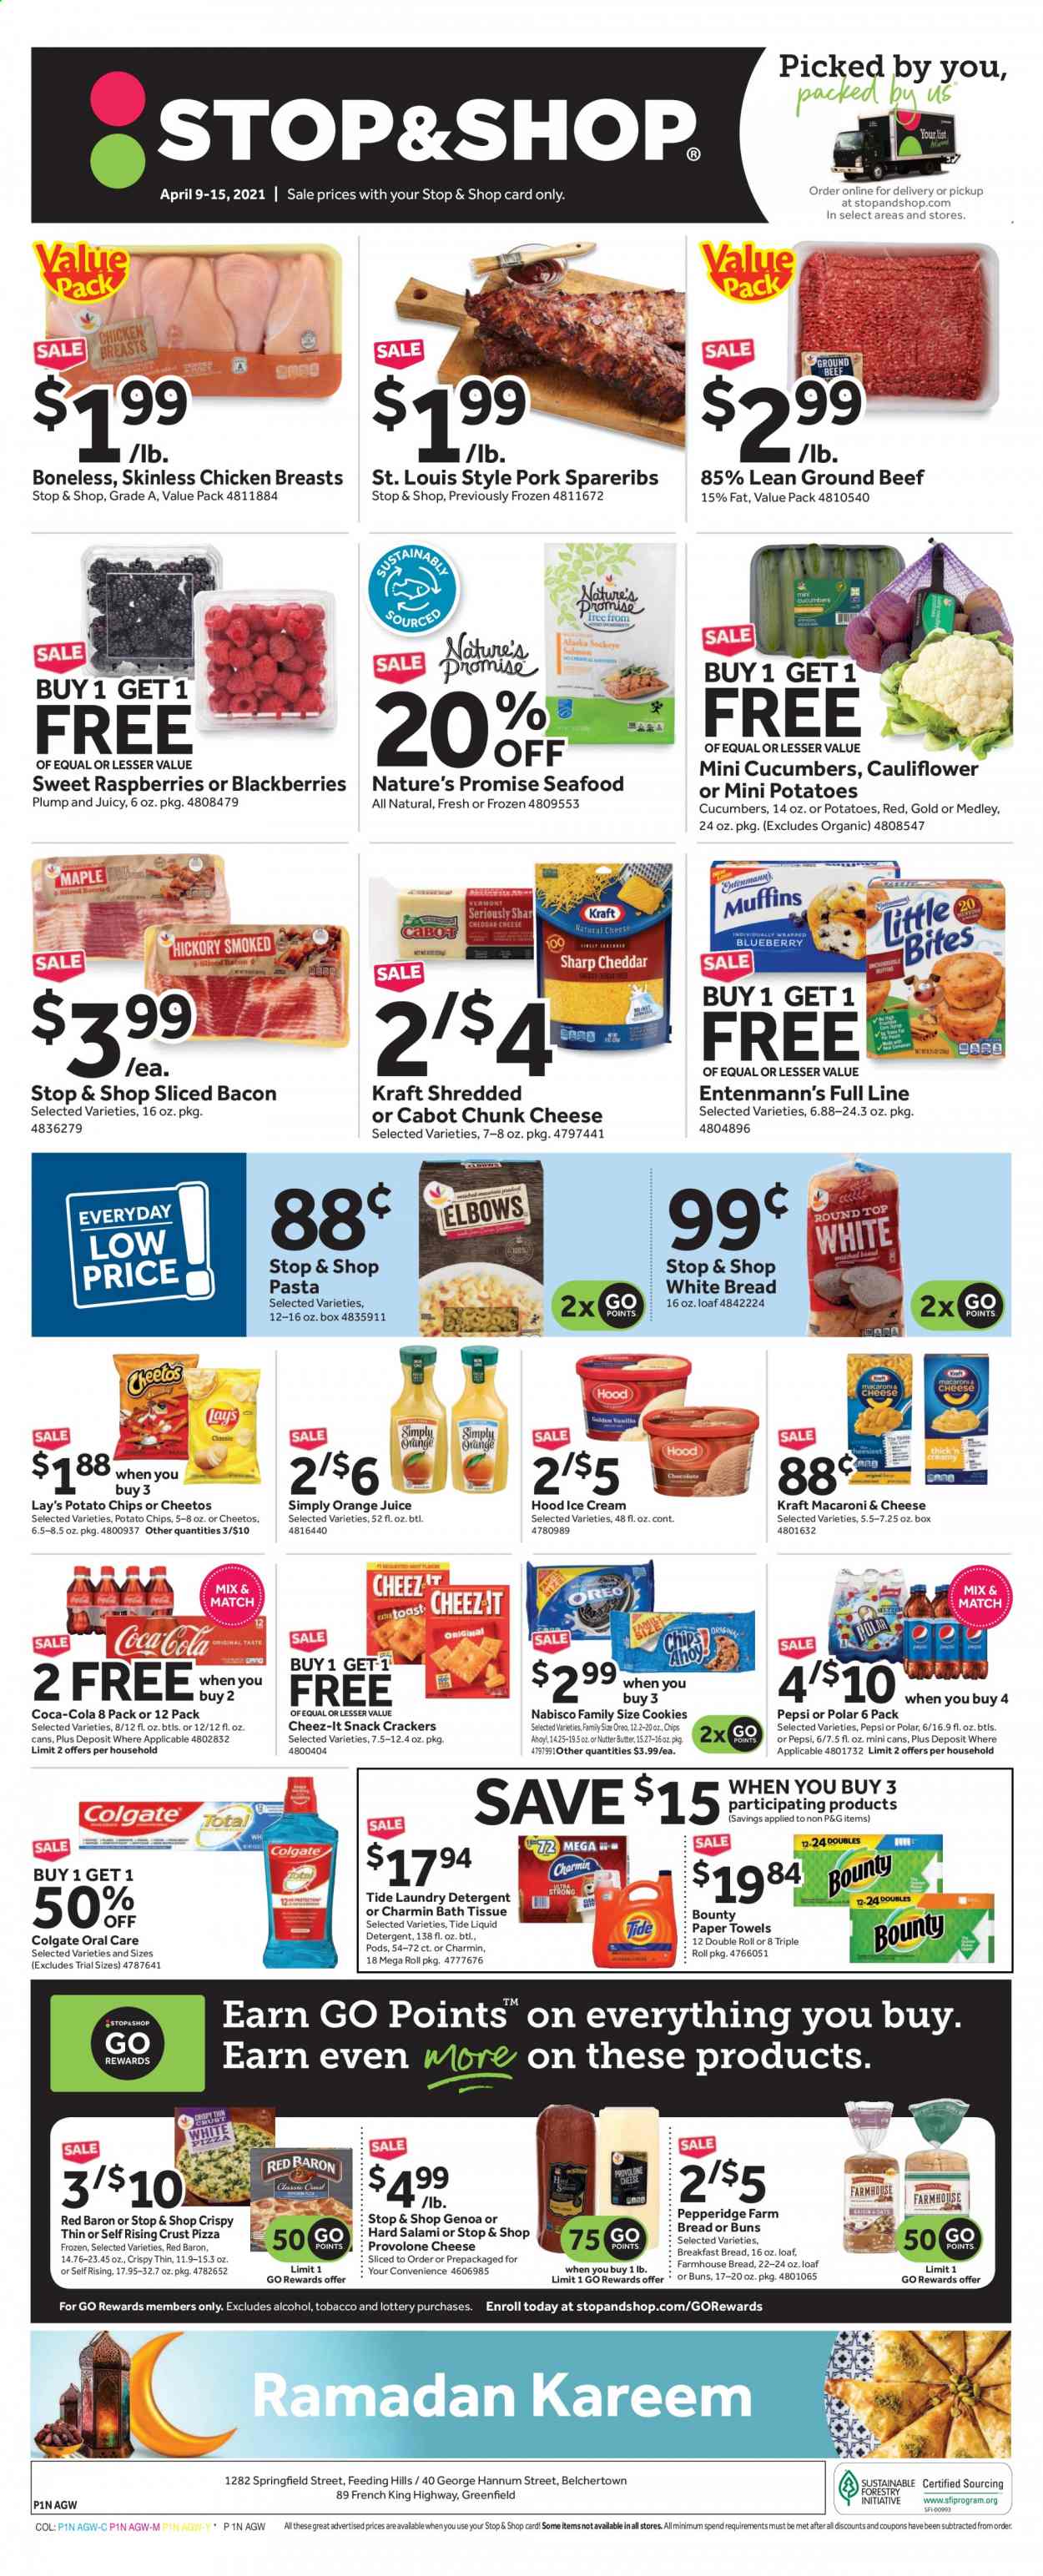 thumbnail - Stop & Shop Flyer - 04/09/2021 - 04/15/2021 - Sales products - white bread, buns, Nature’s Promise, muffin, Entenmann's, cauliflower, blackberries, raspberries, chicken breasts, beef meat, ground beef, pork spare ribs, seafood, macaroni & cheese, pizza, Kraft®, bacon, salami, chunk cheese, Provolone, Oreo, butter, ice cream, Red Baron, cookies, snack, Bounty, crackers, Little Bites, potato chips, Cheetos, Lay’s, Cheez-It, pasta, Coca-Cola, Pepsi, orange juice, juice, bath tissue, kitchen towels, paper towels, Charmin, Tide, liquid detergent, laundry detergent, Colgate, Sharp, pin, Hill's. Page 1.